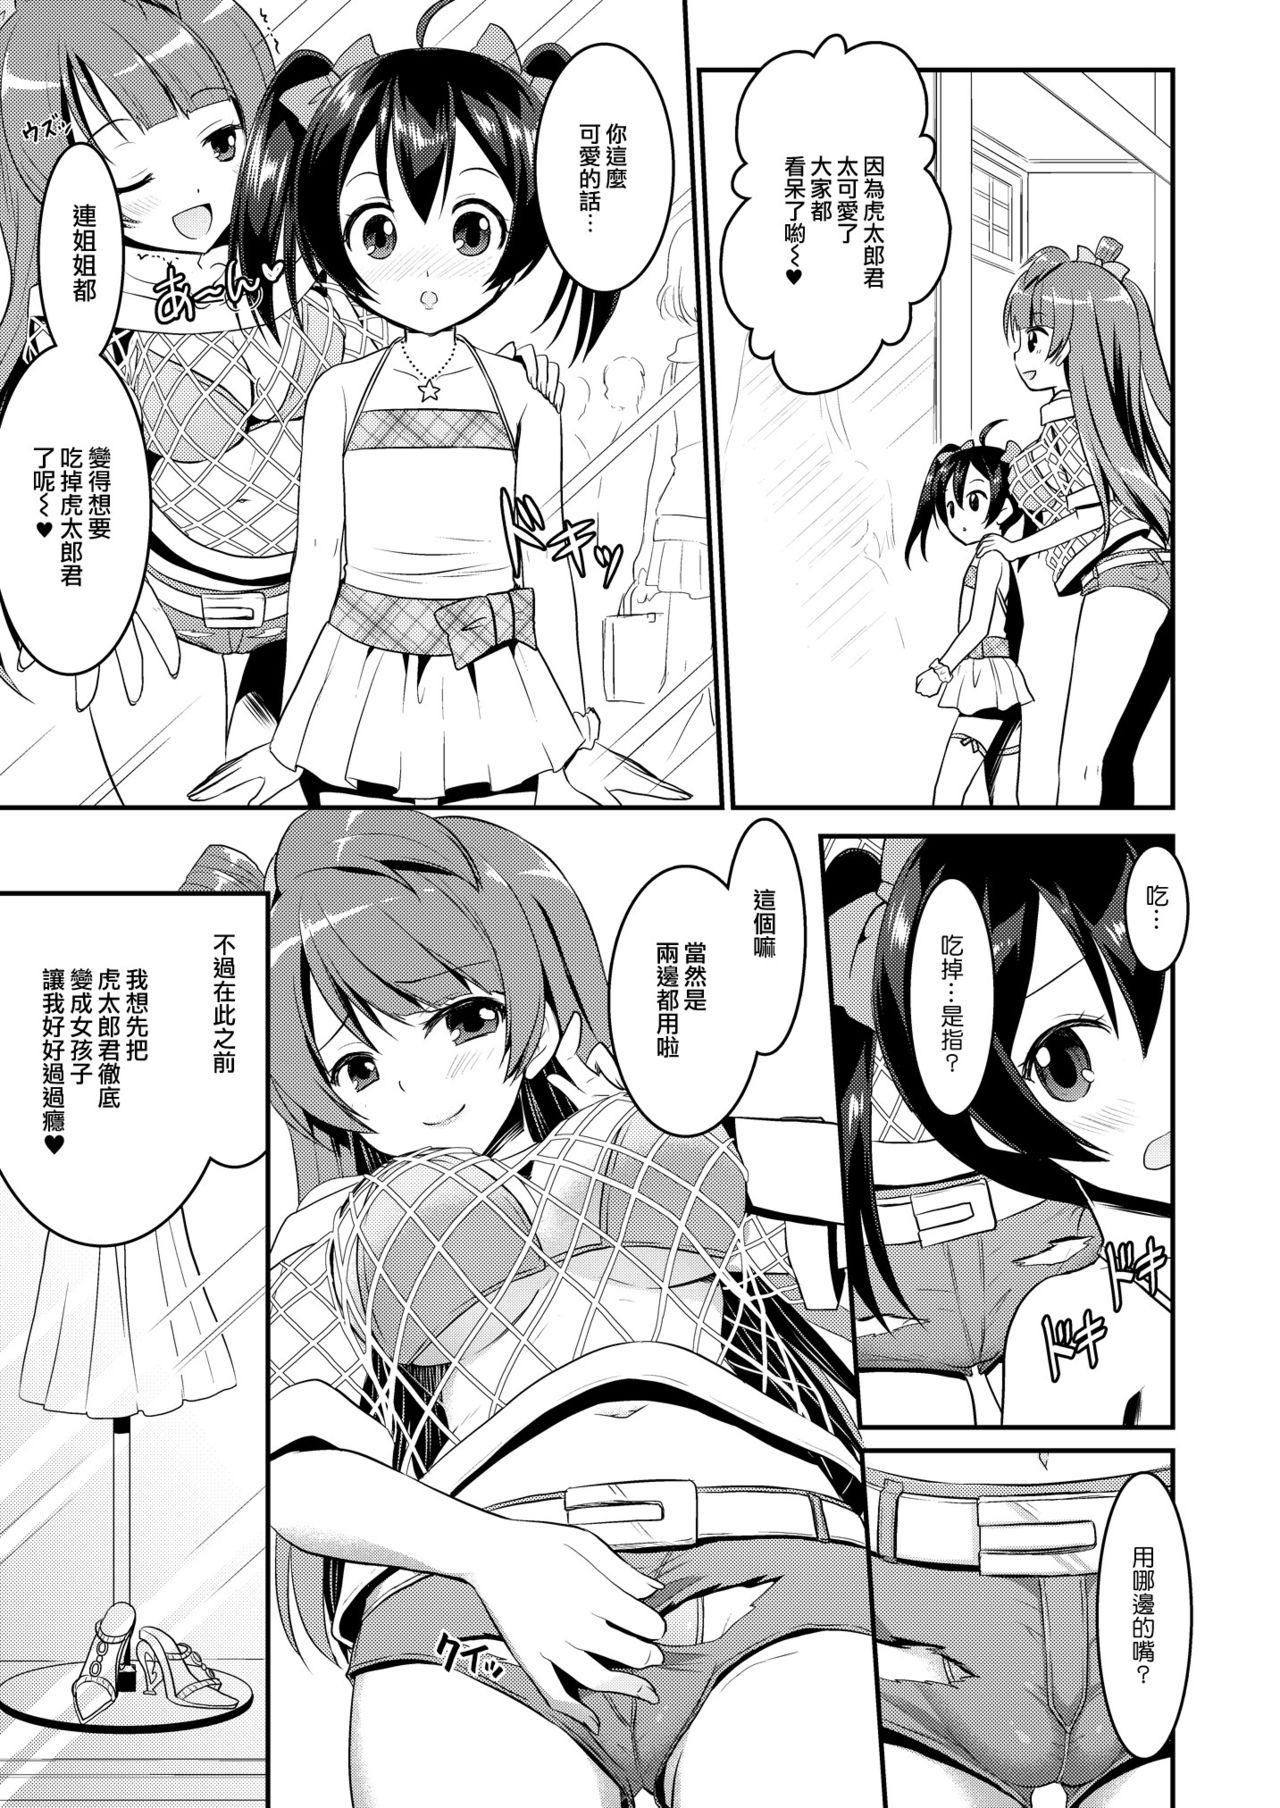 Canadian Eat Meat Girl 4 - Love live 3way - Page 9